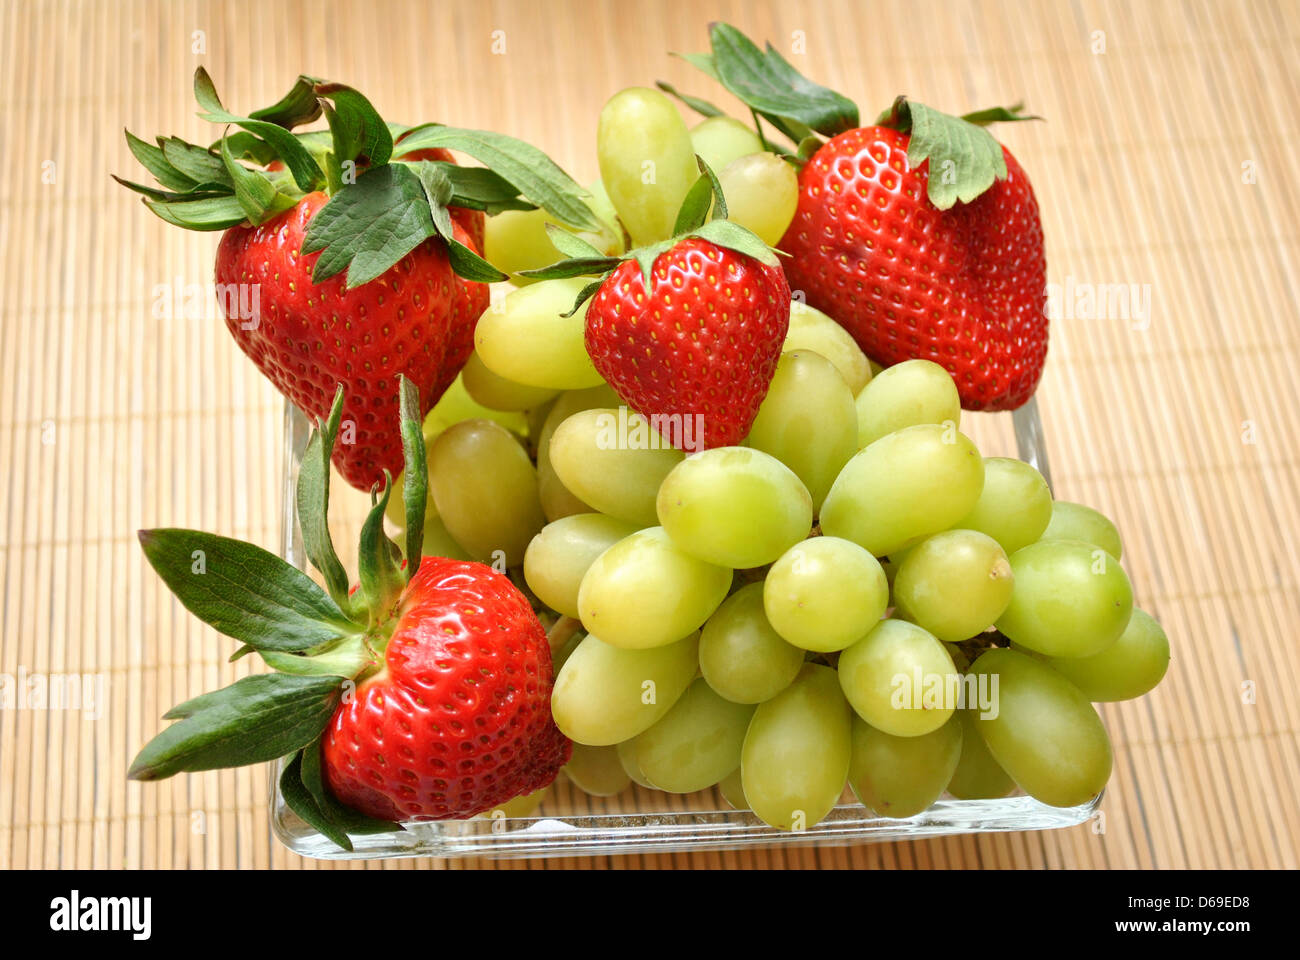 Healthy Snack of Grapes and Strawberries Stock Photo